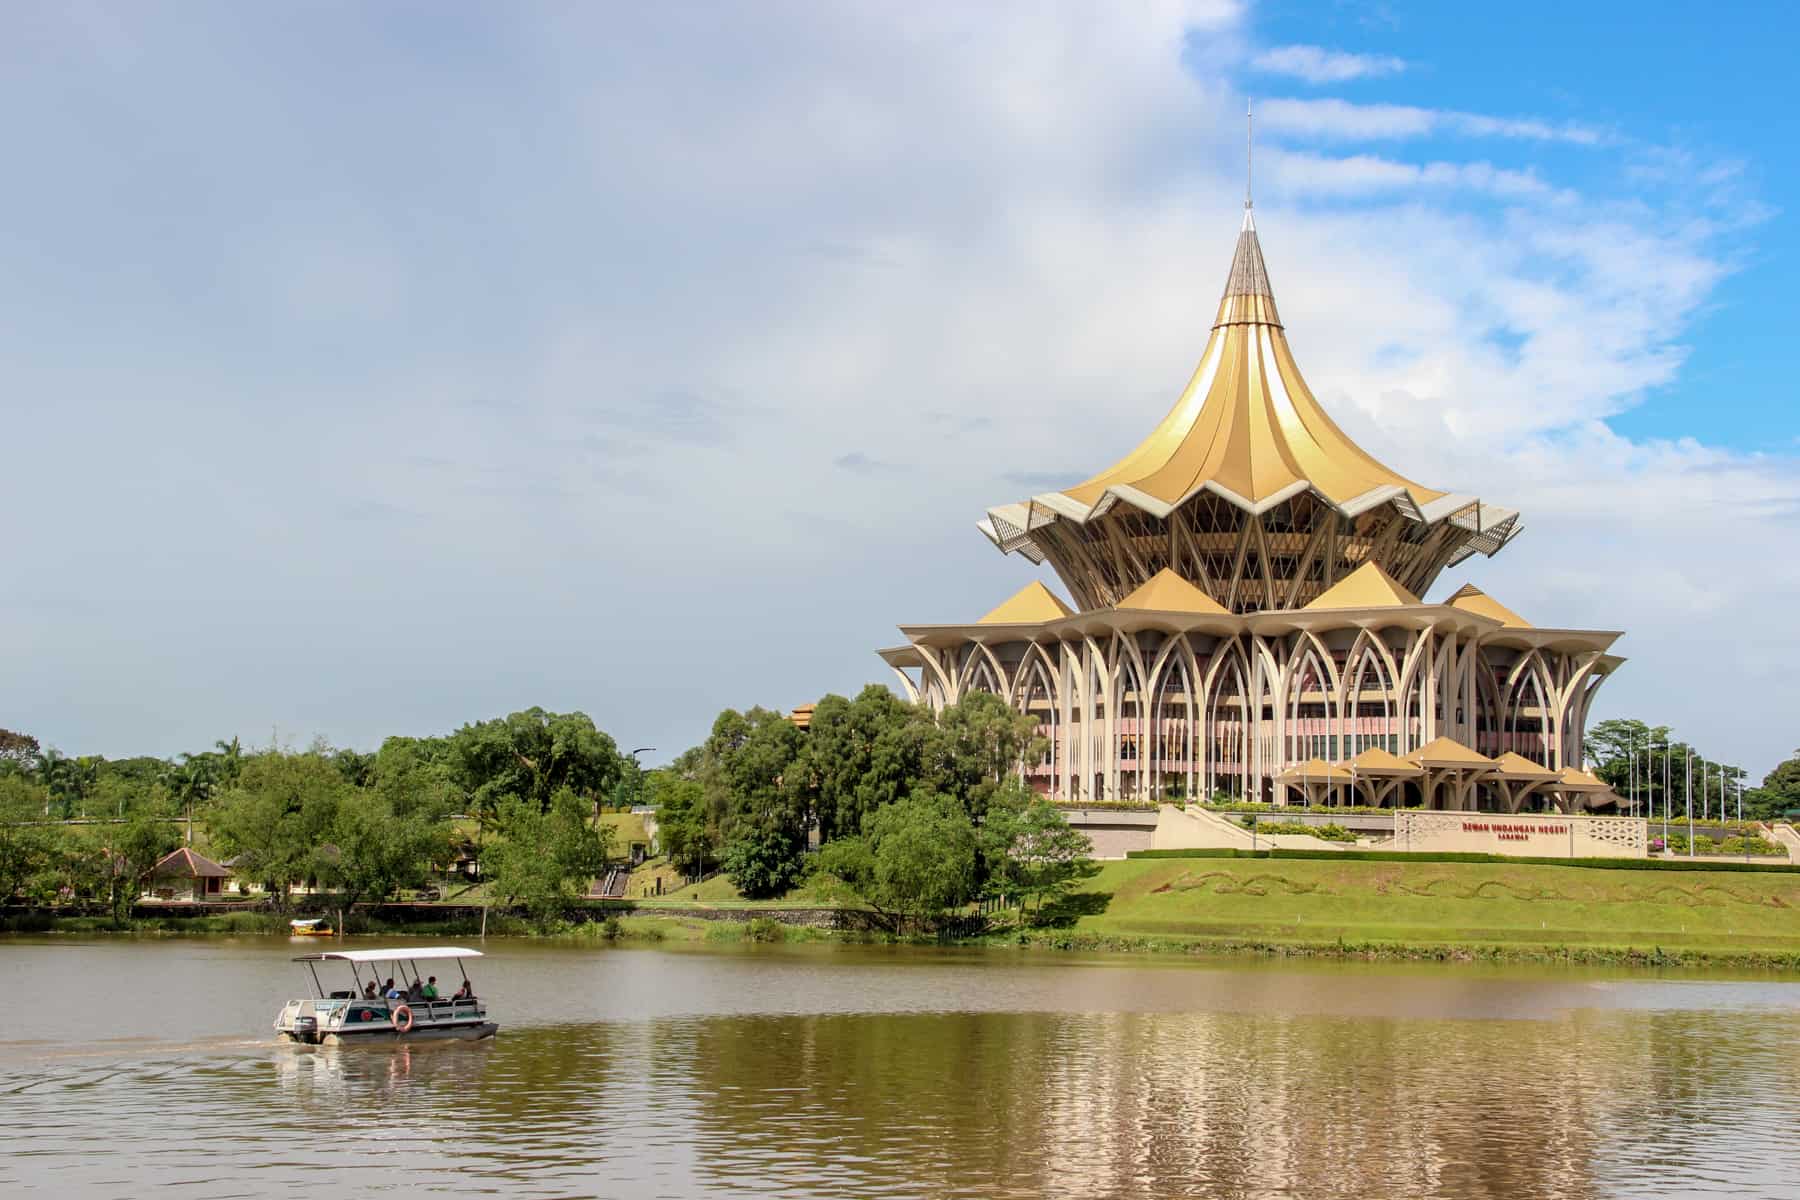 A boat glides past the golden two-tiered cake-like structure with a pointed hat style roof of the New Sarawak State Legislative Assembly Building in Kuching, Borneo